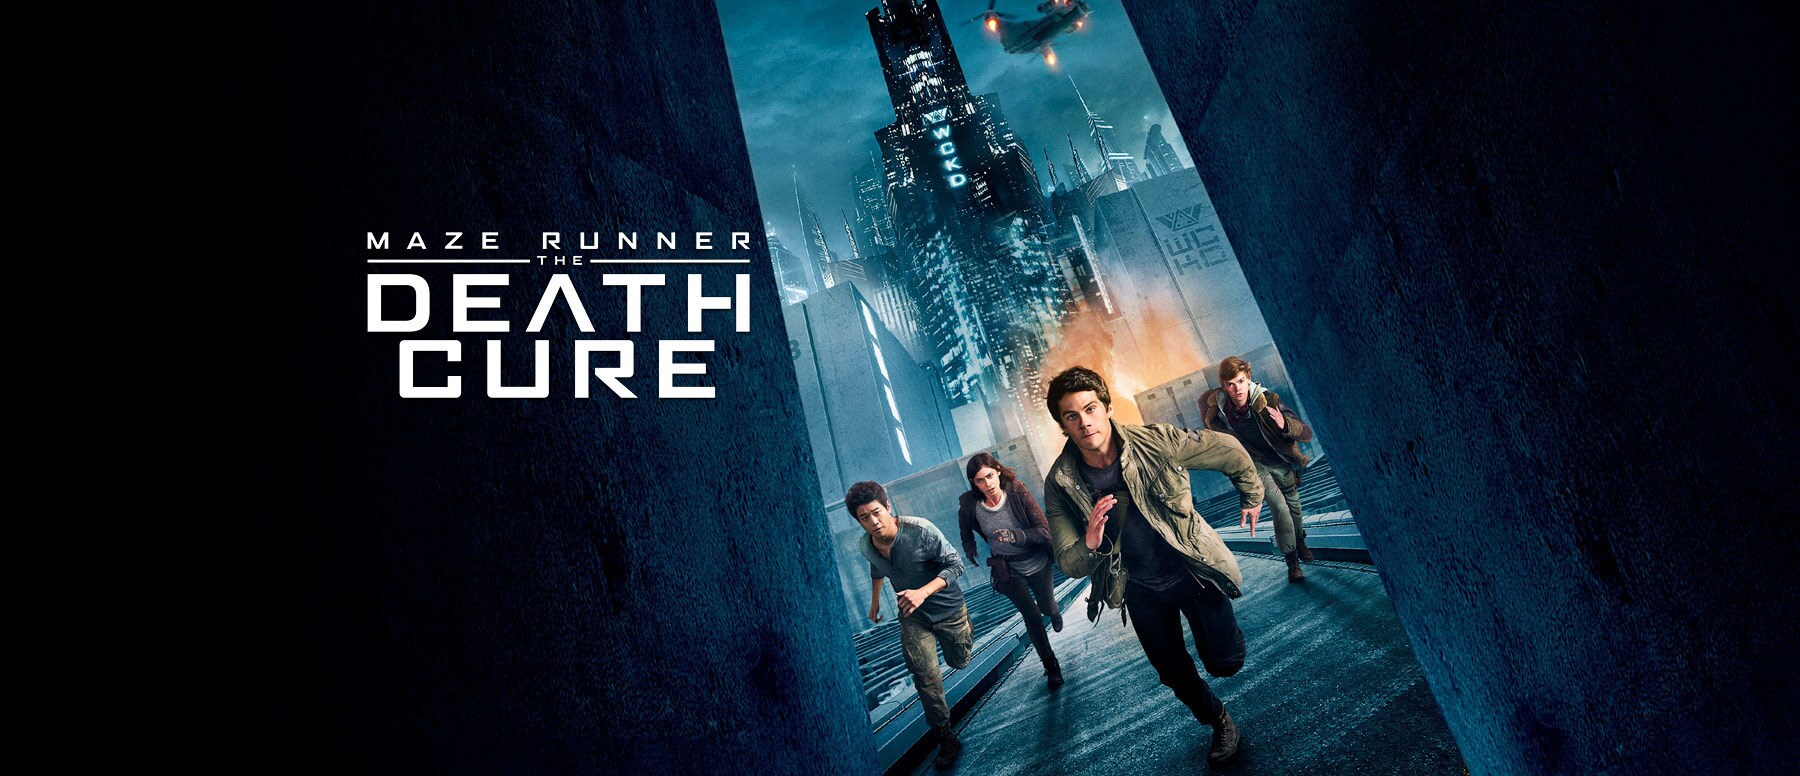 Maze Runner: The Death Cure Hero